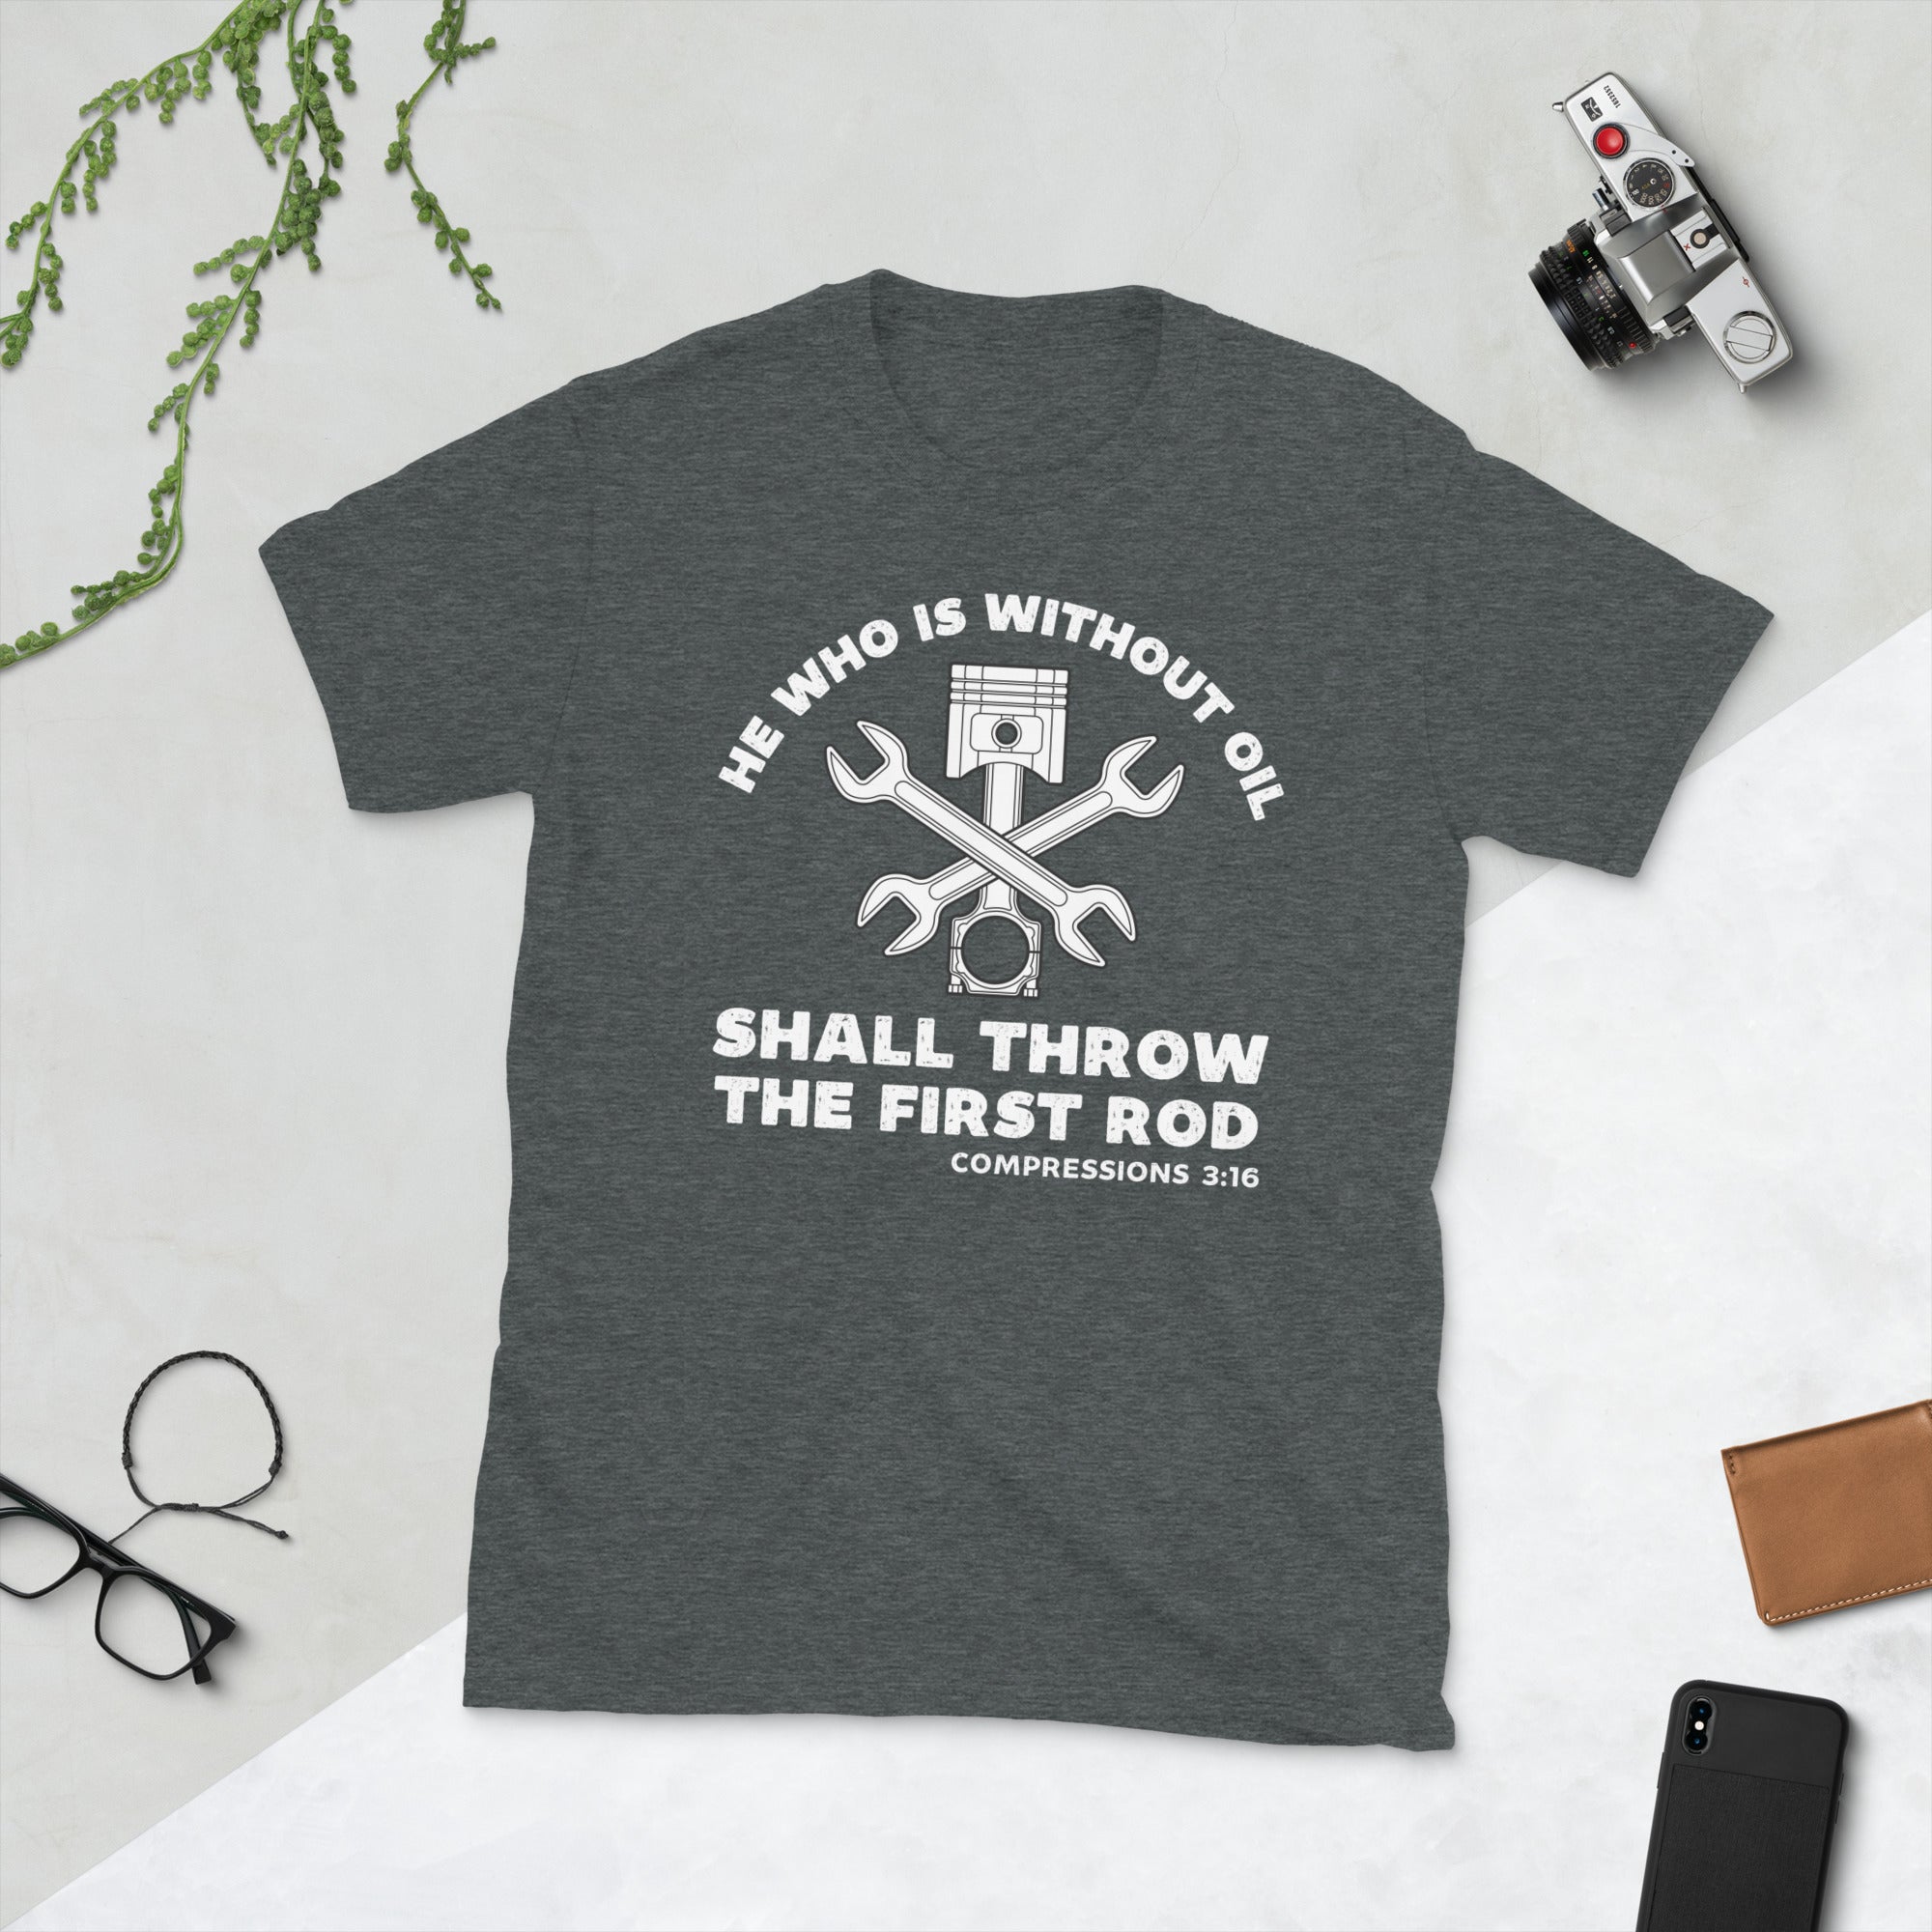 He Who Is Without Oil Shall Throw The First Rod, Car Mechanic Shirt, Funny Mechanic Gifts, Diesel Mechanic, Engineer Dad Tshirt - Madeinsea©